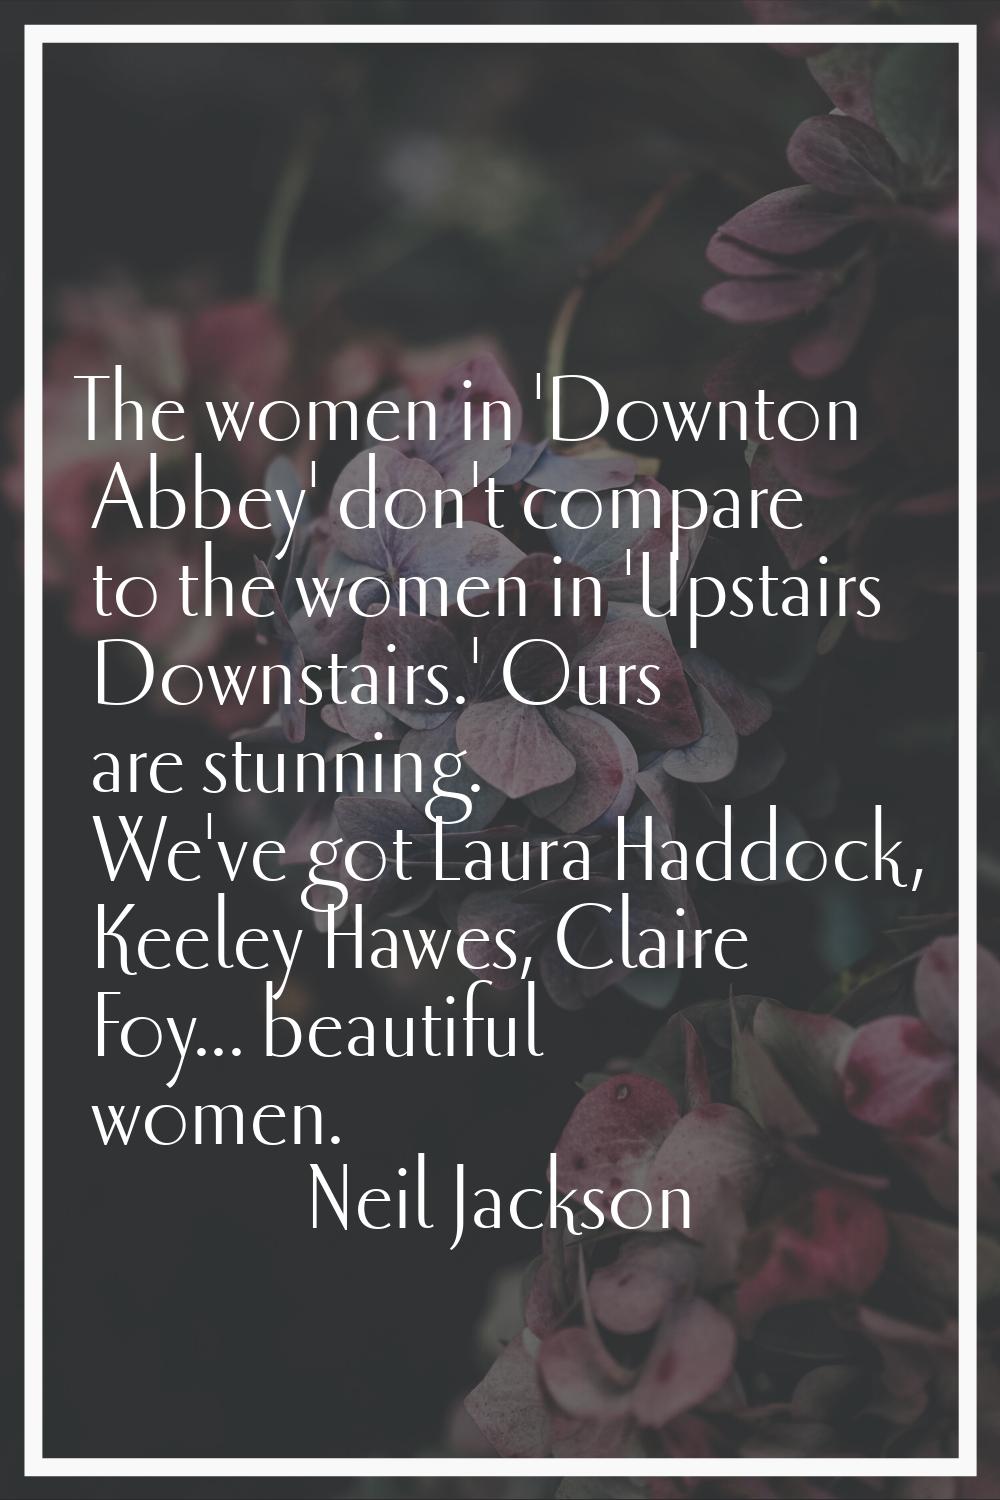 The women in 'Downton Abbey' don't compare to the women in 'Upstairs Downstairs.' Ours are stunning